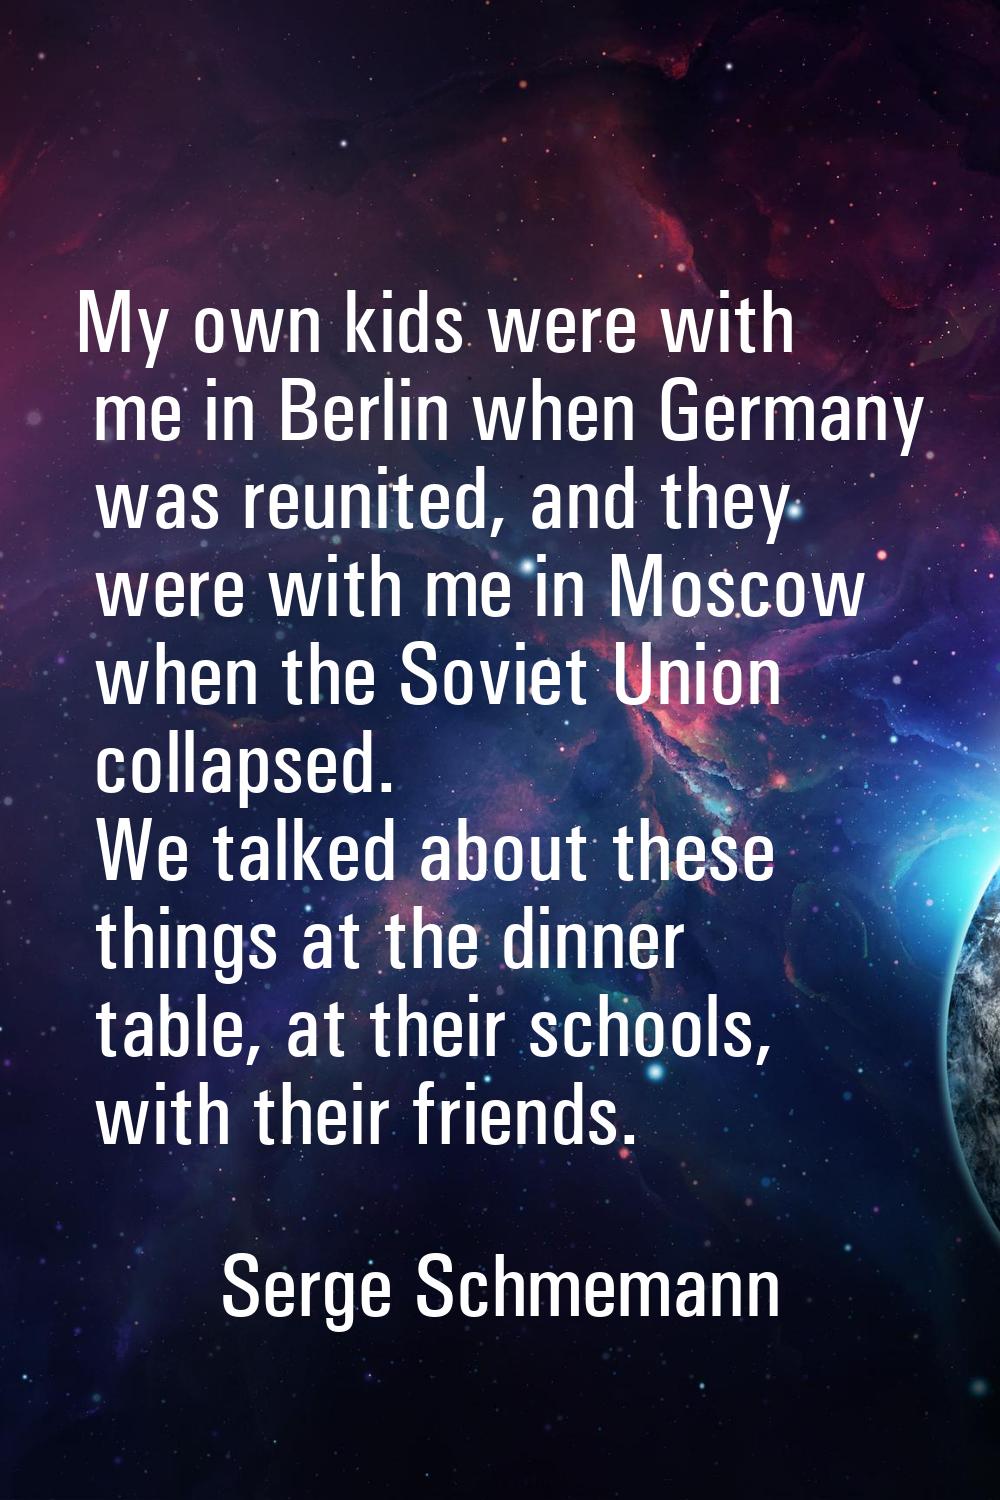 My own kids were with me in Berlin when Germany was reunited, and they were with me in Moscow when 